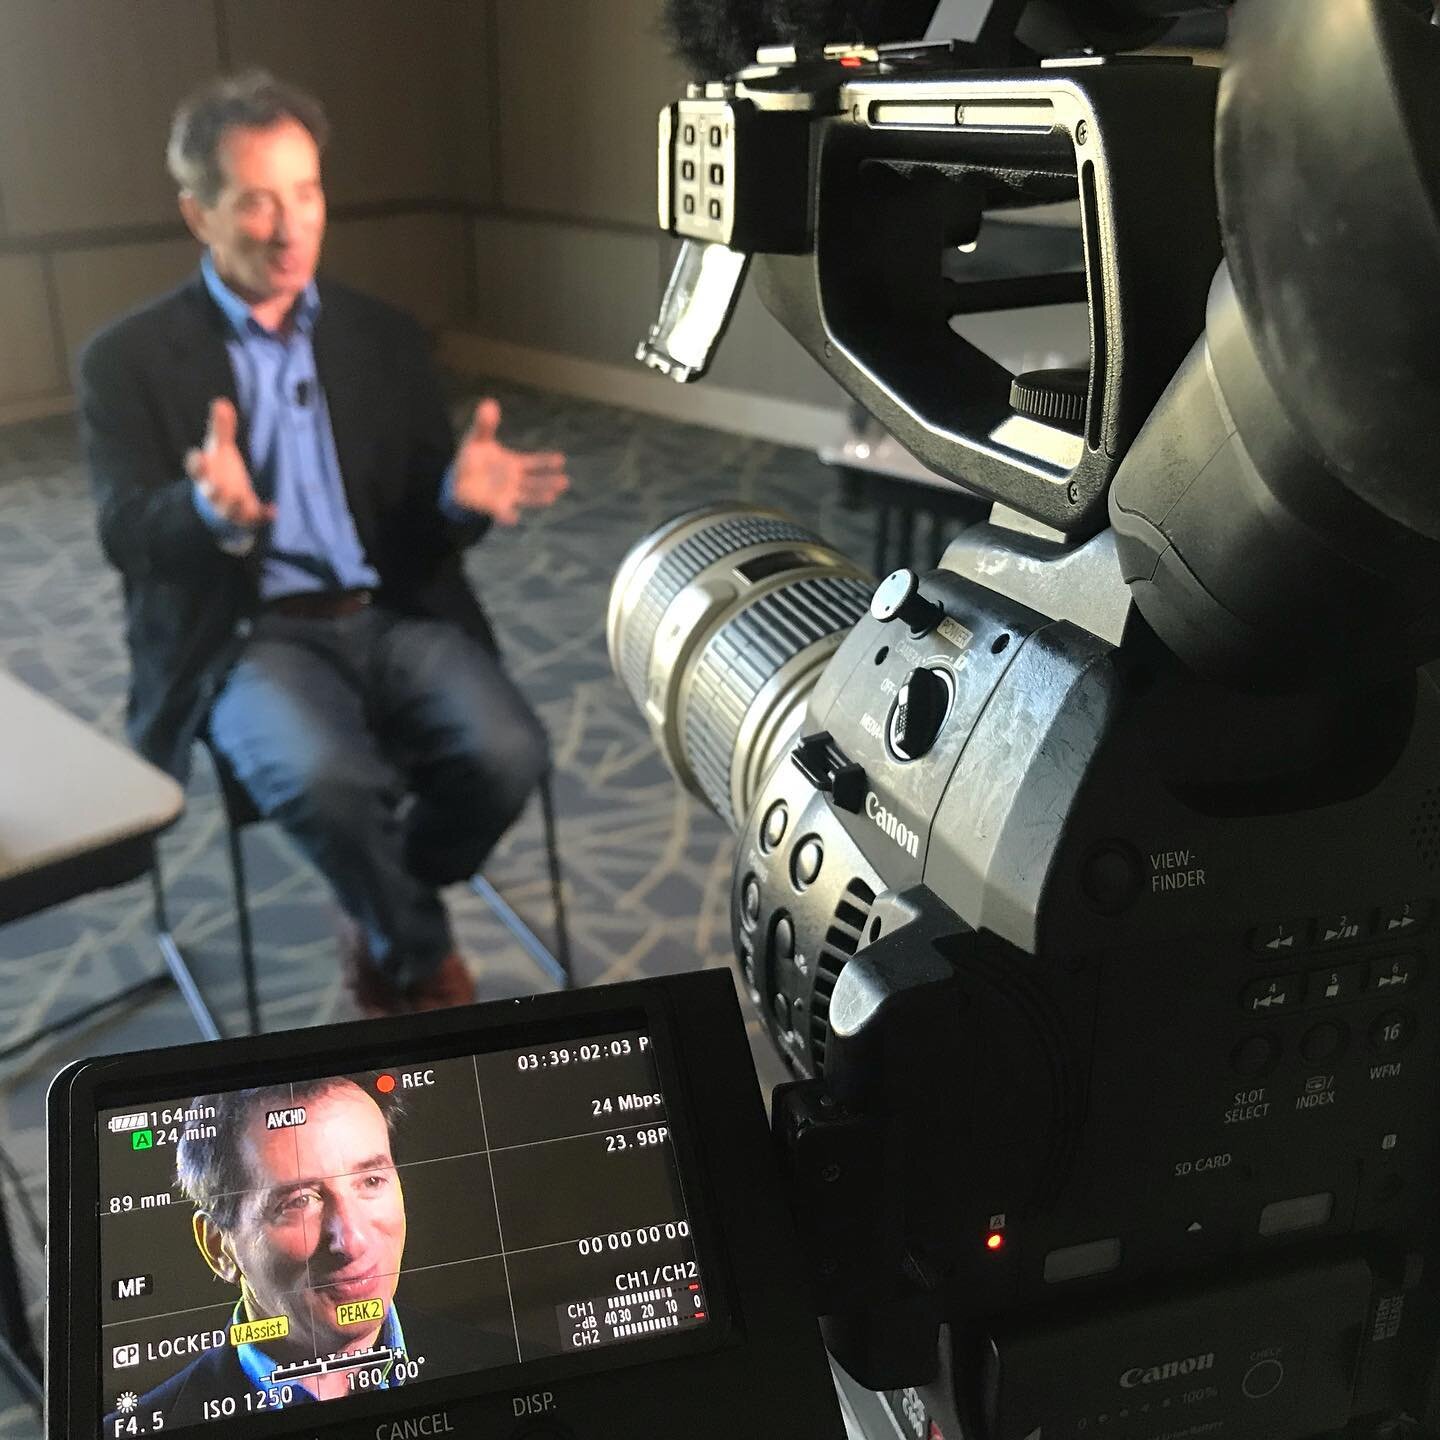 #behindthescenes with Richard Eidlin, co-founder of #americansustainablebusinesscouncil at #citizensclimatelobby on how businesses are adopting the #triplebottomline